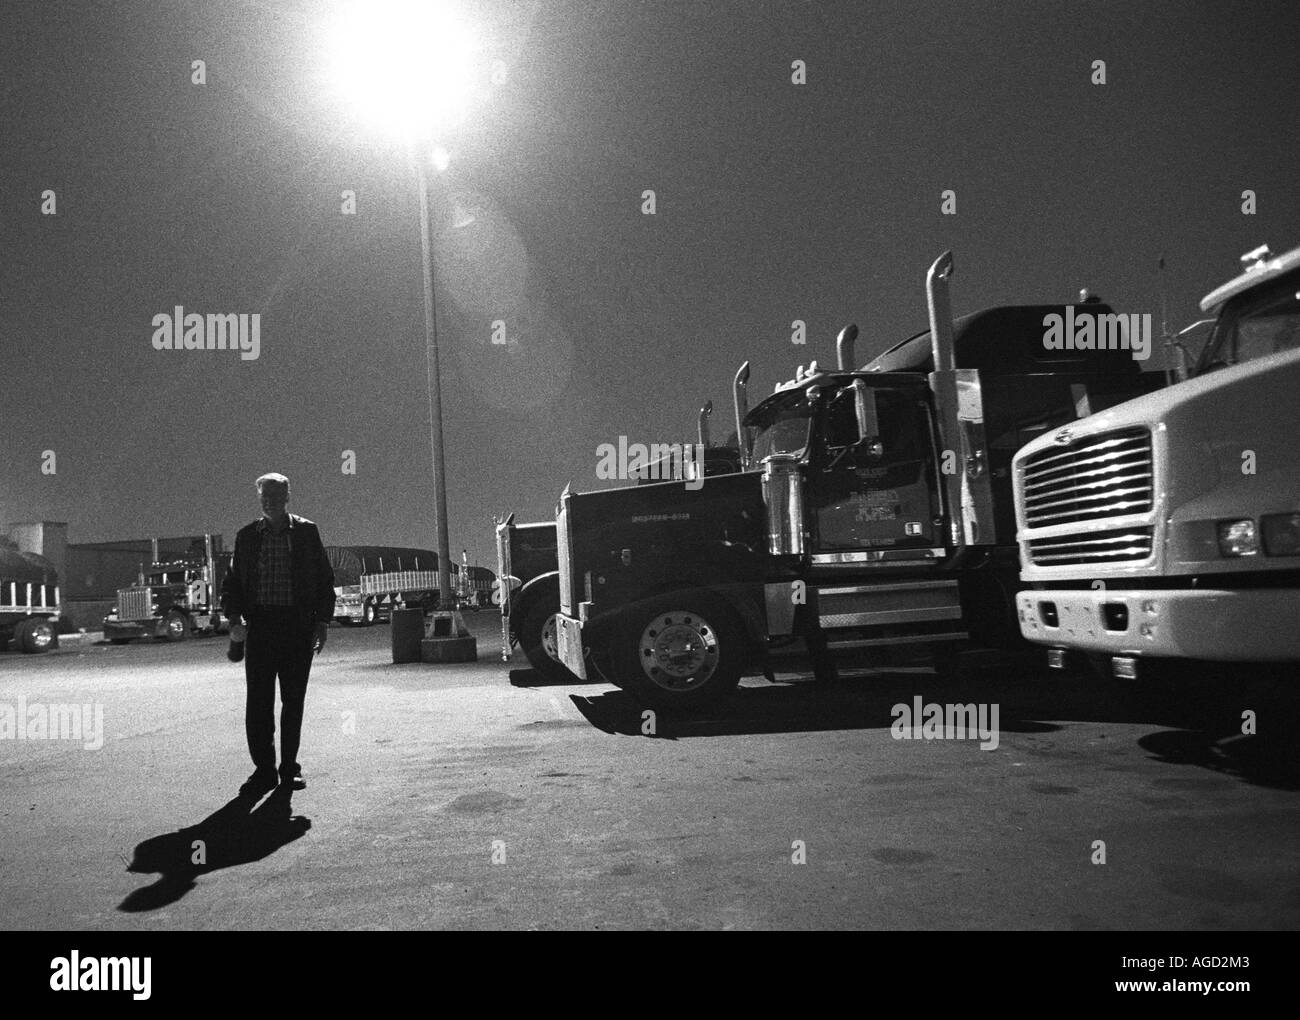 Dearborn Michigan Teamster truck driver at a truck stop in a busy industrial area near Detroit Stock Photo